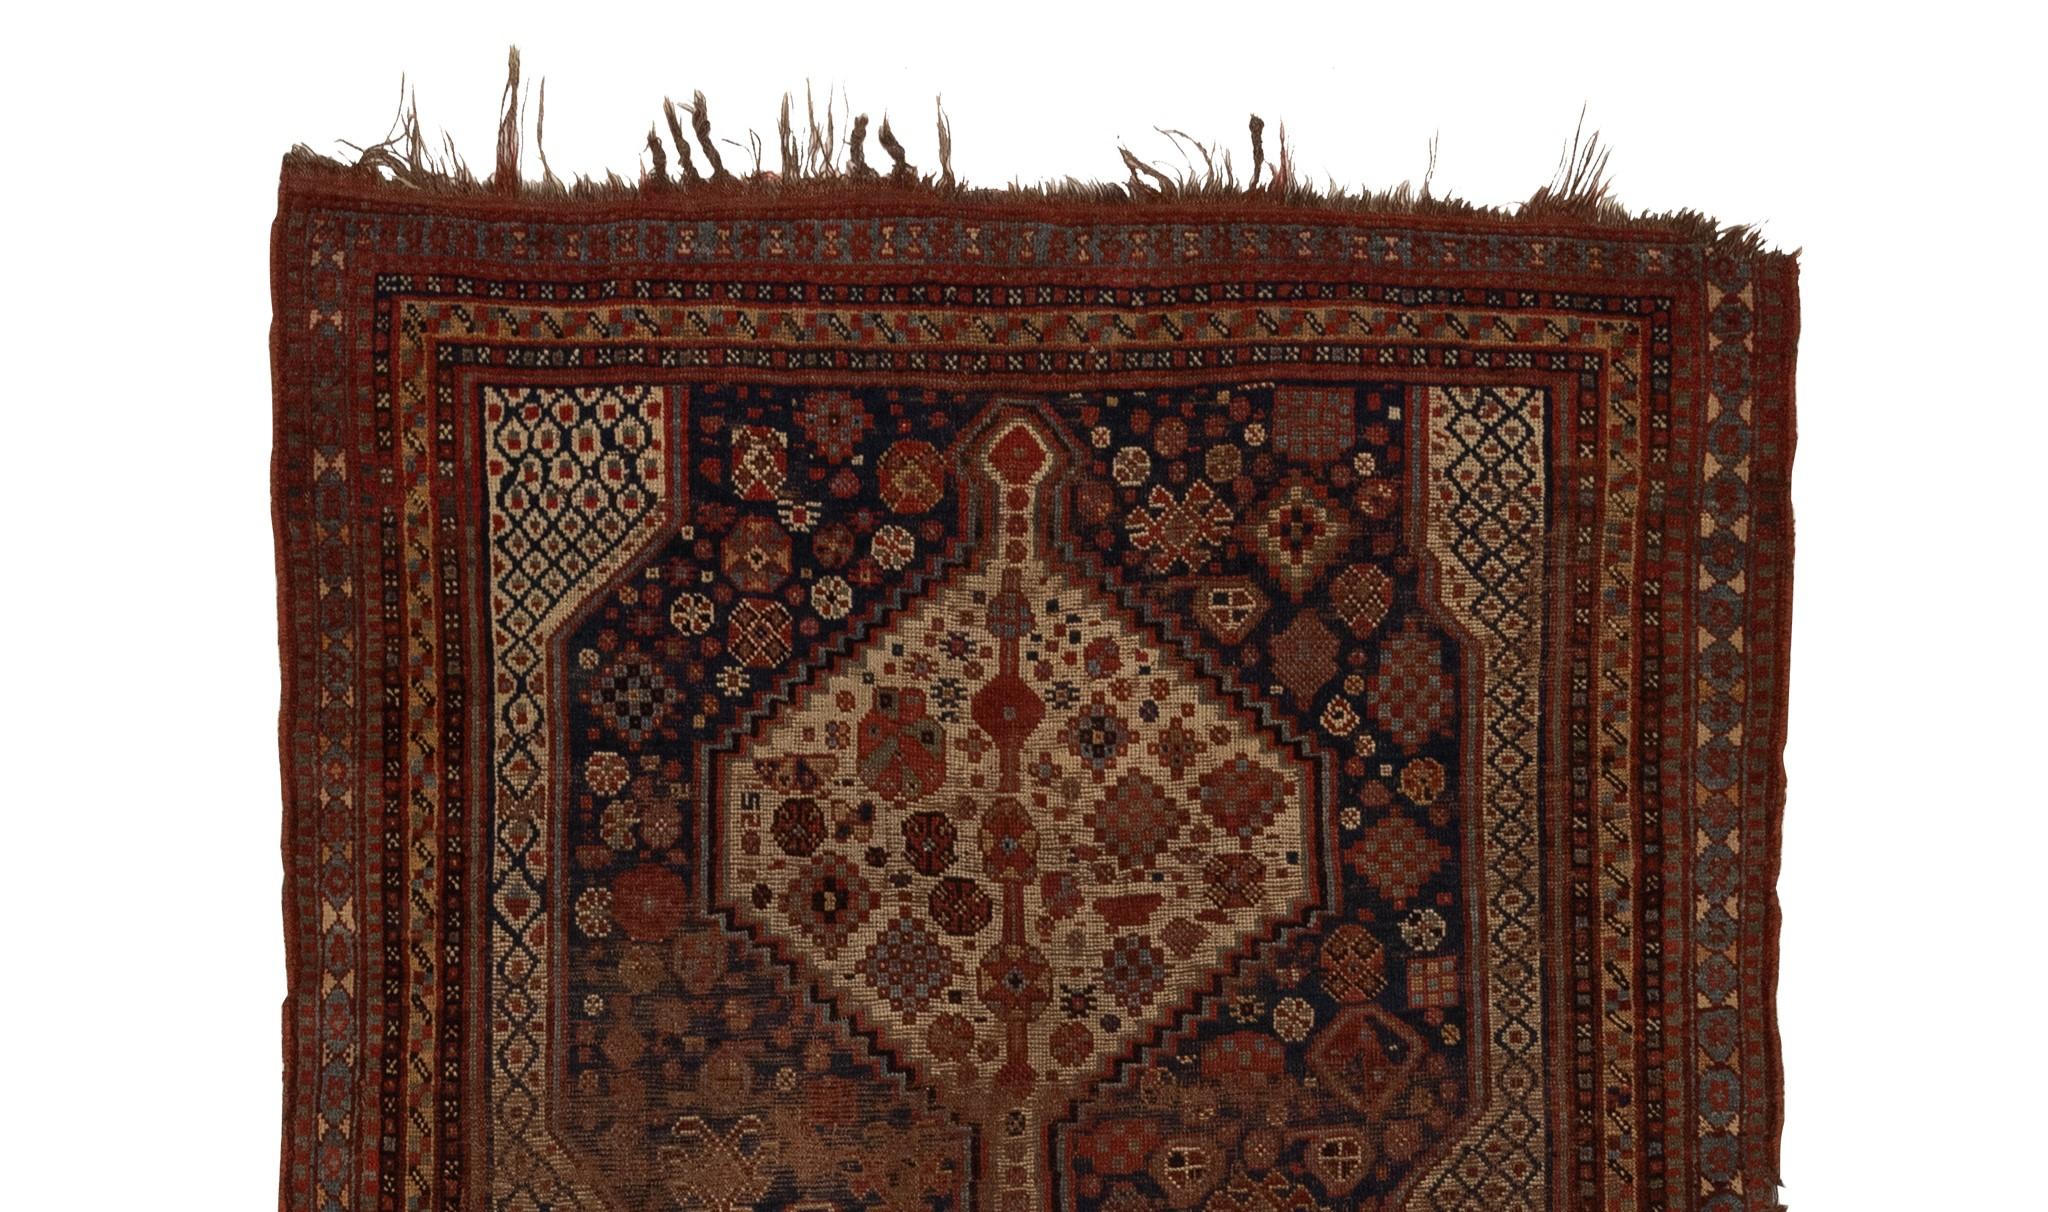 The Qashqai rugs are a testament to the rich cultural heritage and unifying spirit of a proud tribal confederation. These pastoral nomads, who trace their lineage to the Turkmen and Ersari tribes, traverse the vast expanse of the Isfahan province,